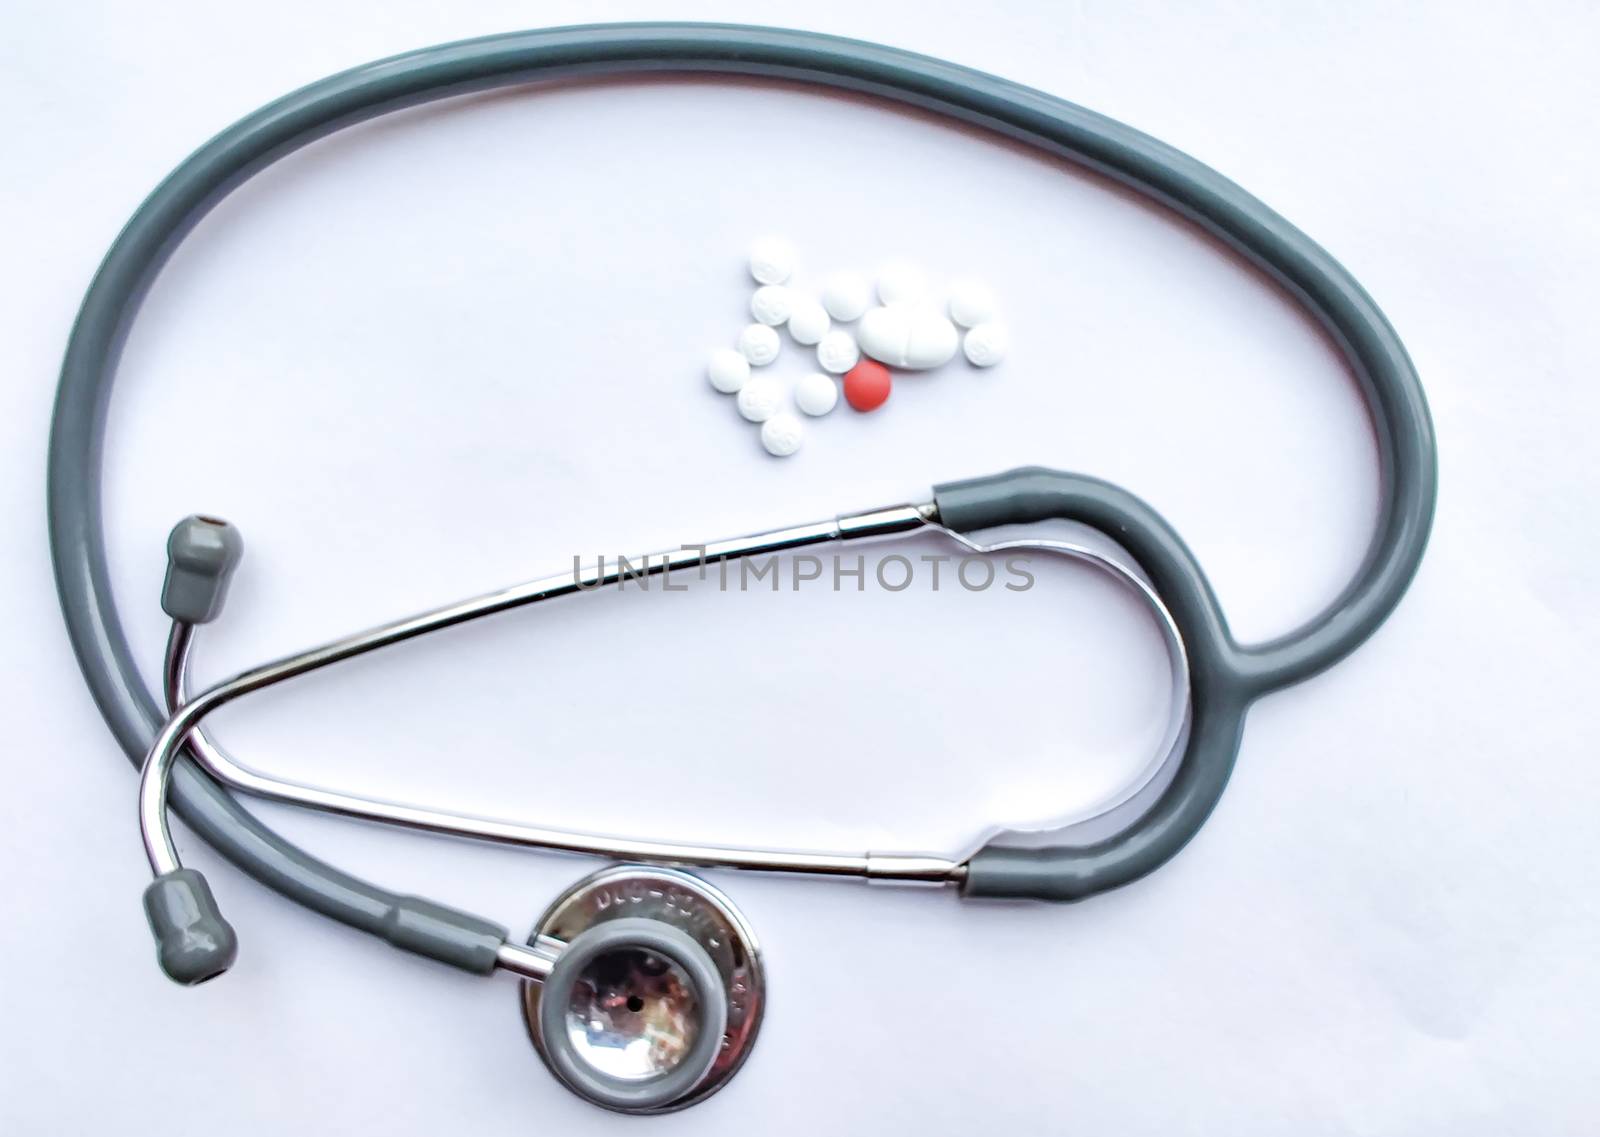 Pills spilled out of a plastic bottle with a stethoscope in the frame and isolated on white background. Top view with copy space. Medicine concept